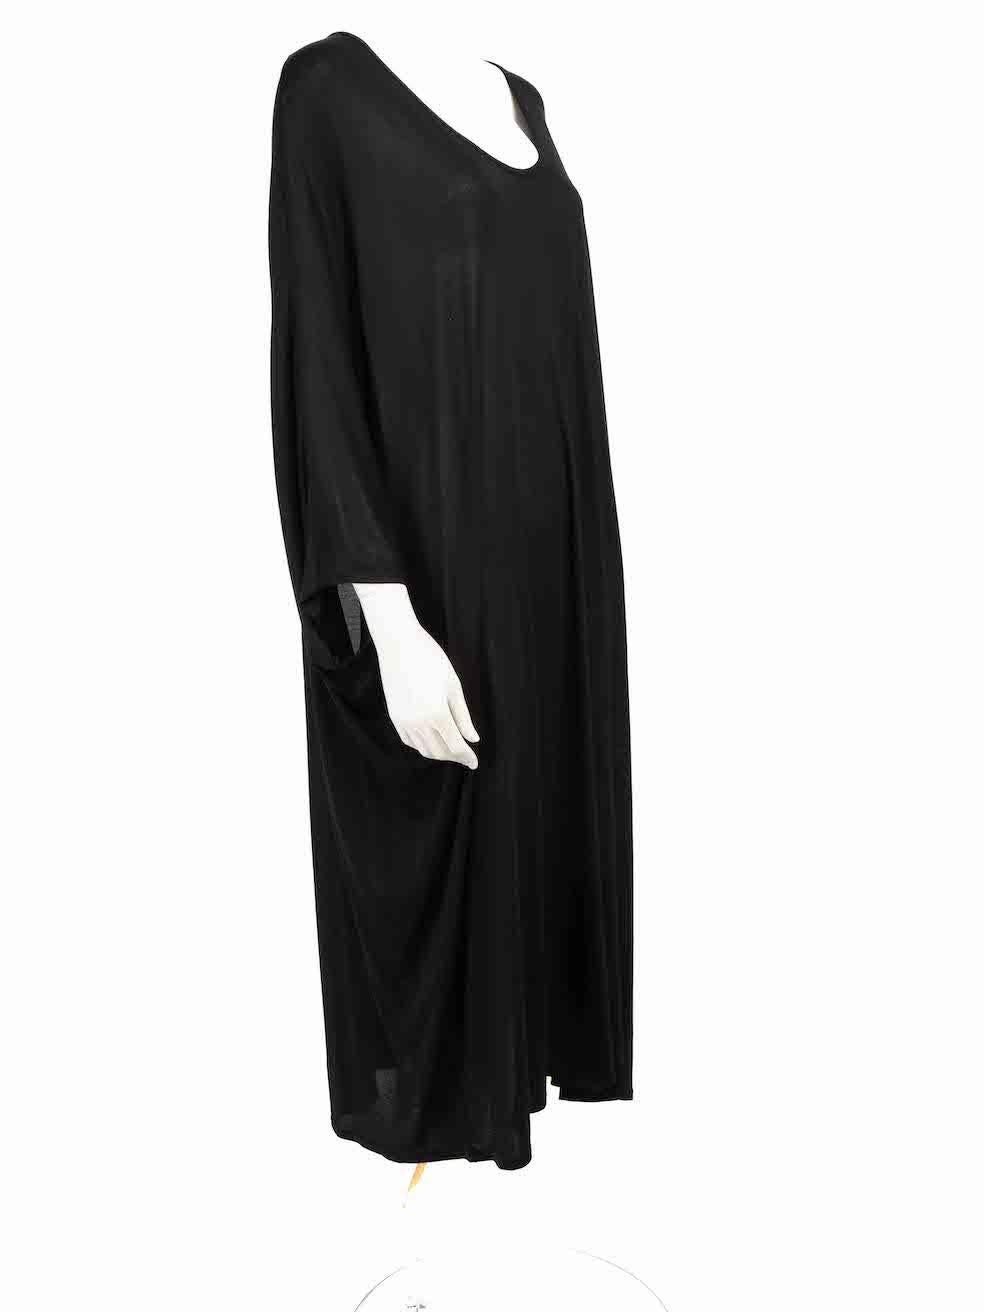 CONDITION is Very good. Hardly any visible wear to dress is evident on this used The Row designer resale item.
 
 Details
 Black
 Viscose
 Dress
 Short batwing sleeves
 Midi
 Round neck
 Stretchy
 Oversized fit
 
 
 Made in USA
 
 Composition
 85%